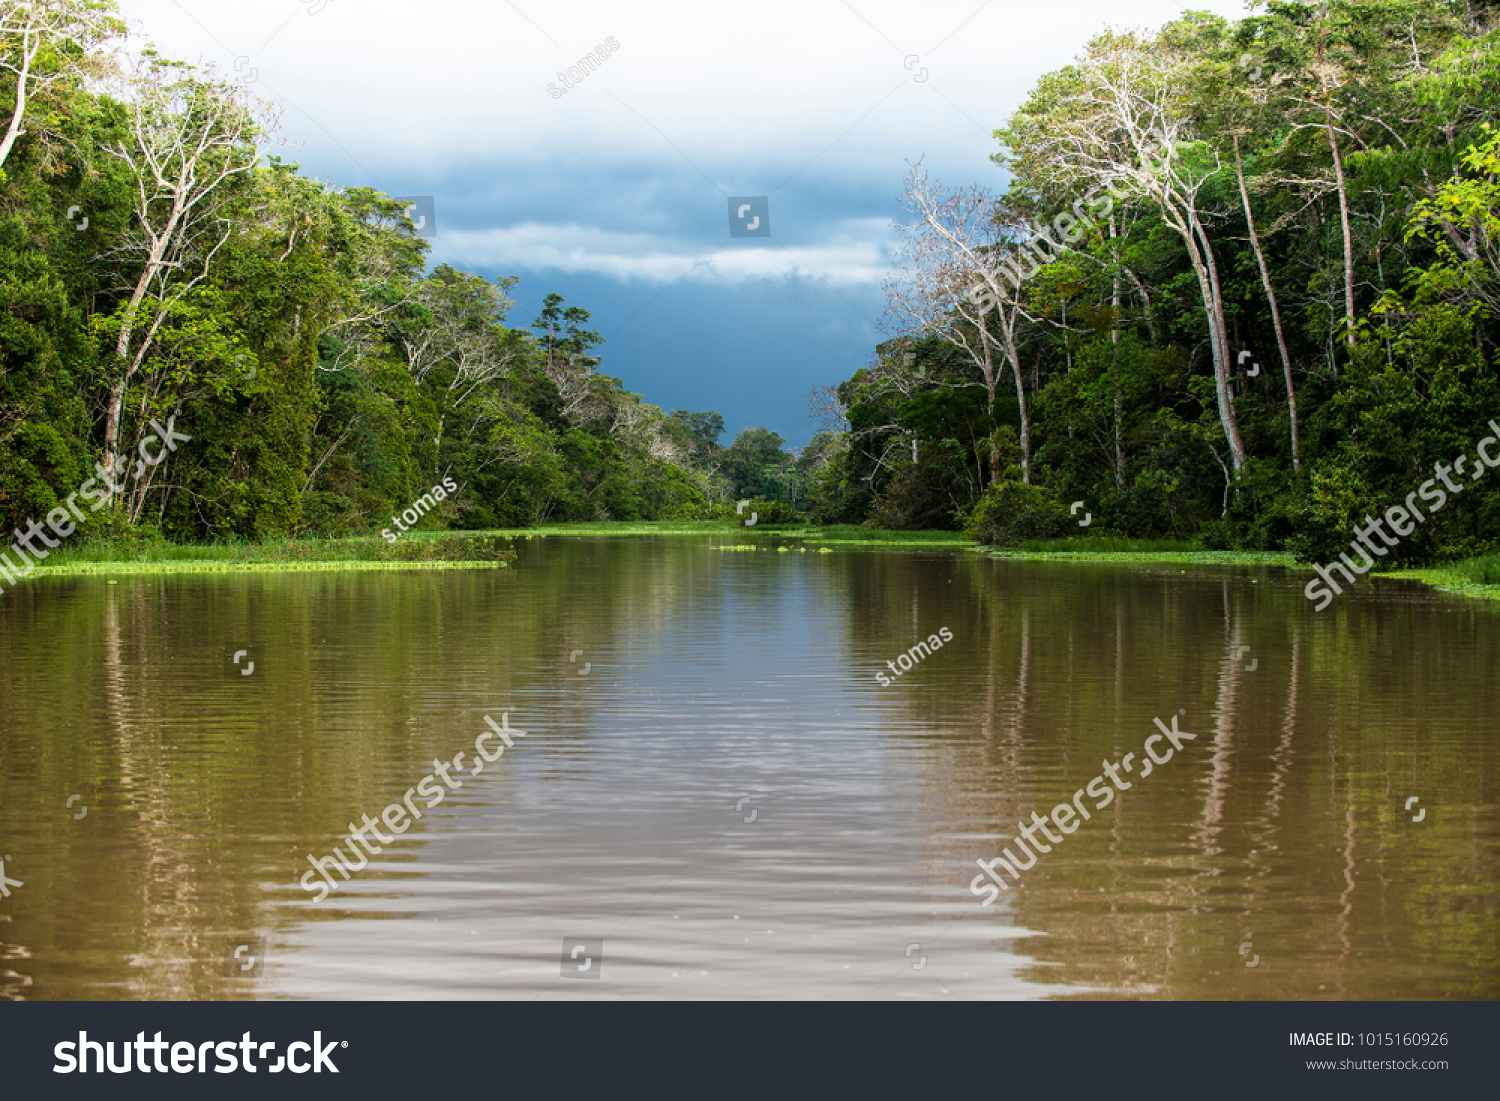 The Amazon River, in South America is the largest river in the world by lenght and discharge volume of water. It flows throug Brazil, Peru, Bolivia, Colombia, Ecuador, Venezuela and Guyana. #1015160926